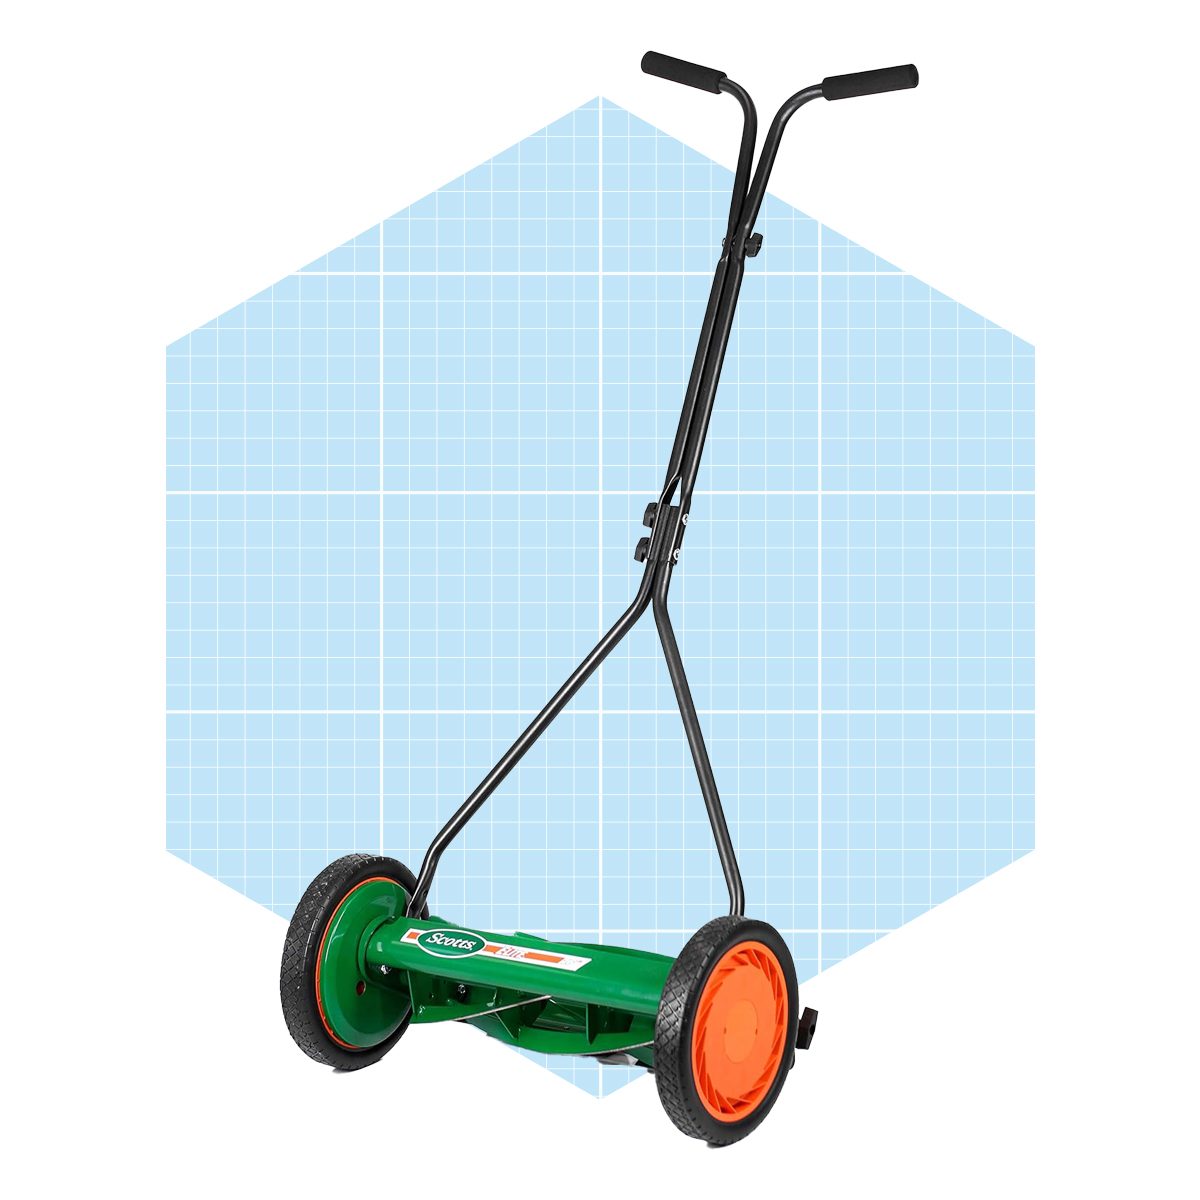 <h3>Scotts 16-inch Reel mower</h3> <p>When it comes to mowing lawns with steeper hills, no <a href="https://www.familyhandyman.com/article/gas-lawn-mower/" rel="noopener noreferrer">gas-powered</a> or electric mower can safely get the job done. Reel mowers are great for folks with small, steep lawns. One of the best reel mowers is the <a href="https://www.amazon.com/Scotts-415-16S-16-Inch-Elite-Mower/dp/B0019MVMLY" rel="noopener">Scotts 16-inch reel lawn mower</a> because it is super lightweight and easy to control.</p> <p>The flared T-style handle makes pushing it up a steep hill or pulling it behind you fairly easy. The Scotts 16-inch reel mower is simple to assemble and takes up minimal space in your garage or shed—about the same amount of wall space as a broom. This reel mower is great for using alongside other mowers if you have any aspect of your yard that cannot be reached by a heavier gas or electric mower.</p> <p><strong>Pros</strong></p> <ul> <li>Lightweight</li> <li>Inexpensive</li> <li>Easy to assemble</li> </ul> <p><strong>Cons</strong></p> <ul> <li>Limited cutting height</li> <li>Requires more frequent mowing</li> </ul> <p class="listicle-page__cta-button-shop"><a class="shop-btn" href="https://www.amazon.com/Scotts-415-16S-16-Inch-Elite-Mower/dp/B0019MVMLY">Shop on Amazon</a></p> <p class="listicle-page__cta-button-shop"><a class="shop-btn" href="https://www.homedepot.com/p/Scotts-Scott-s-16-in-Manual-Walk-Behind-Push-Reel-Lawn-Mower-415-16S/100540960">Shop on Home Depot</a></p>